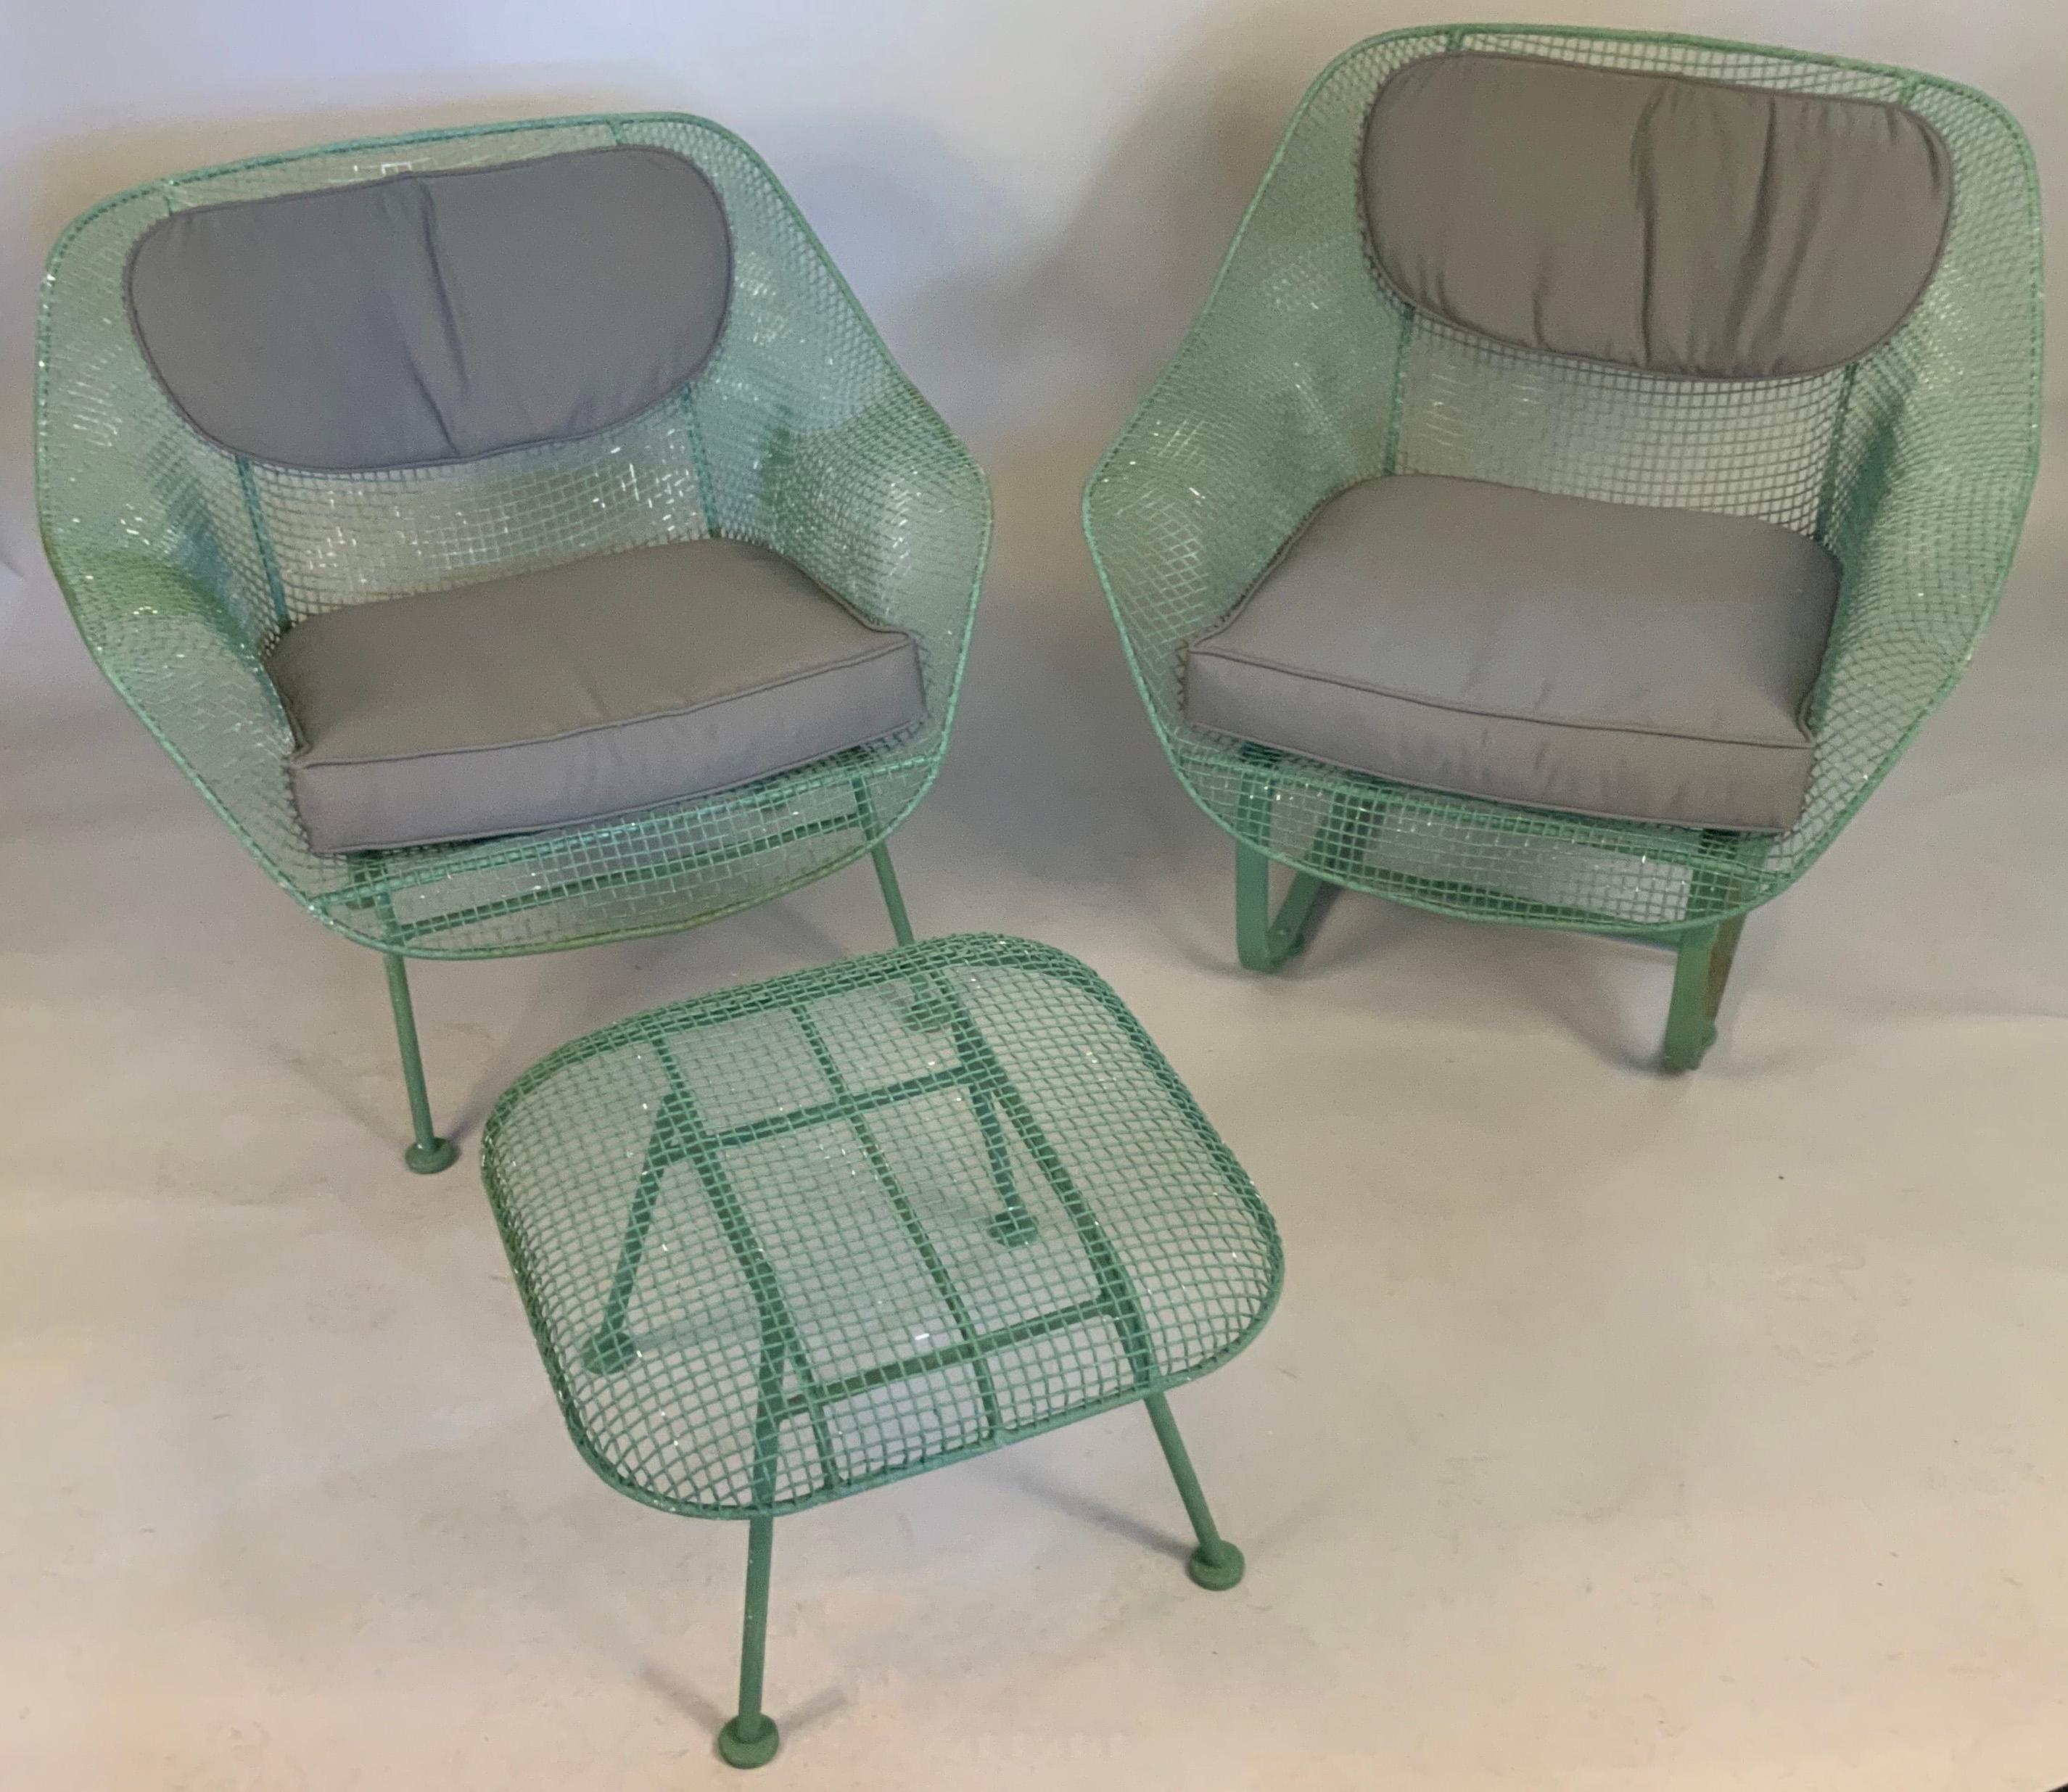 A pair of classic vintage 1950s 'Sculptura' lounge chairs by Russell Woodard. The most comfortable and desirable of Russell Woodard's iconic 'Sculptura' collection, the lounge chair is formed entirely of woven steel mesh, mounted on a spring base of